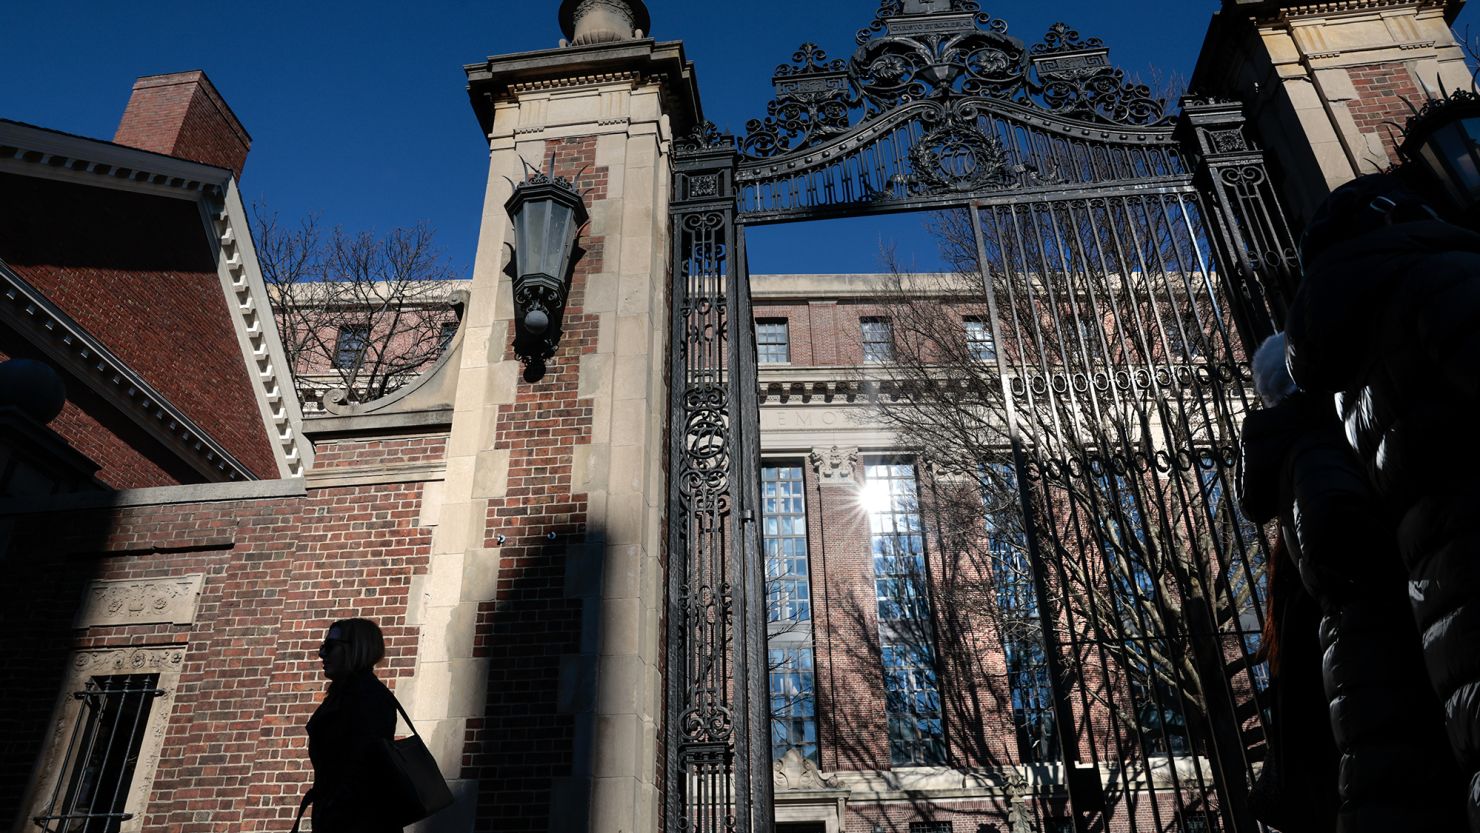 A pedestrian passes a gate to Harvard Yard on Massachusetts Ave. in Cambridge, MA on December 12.